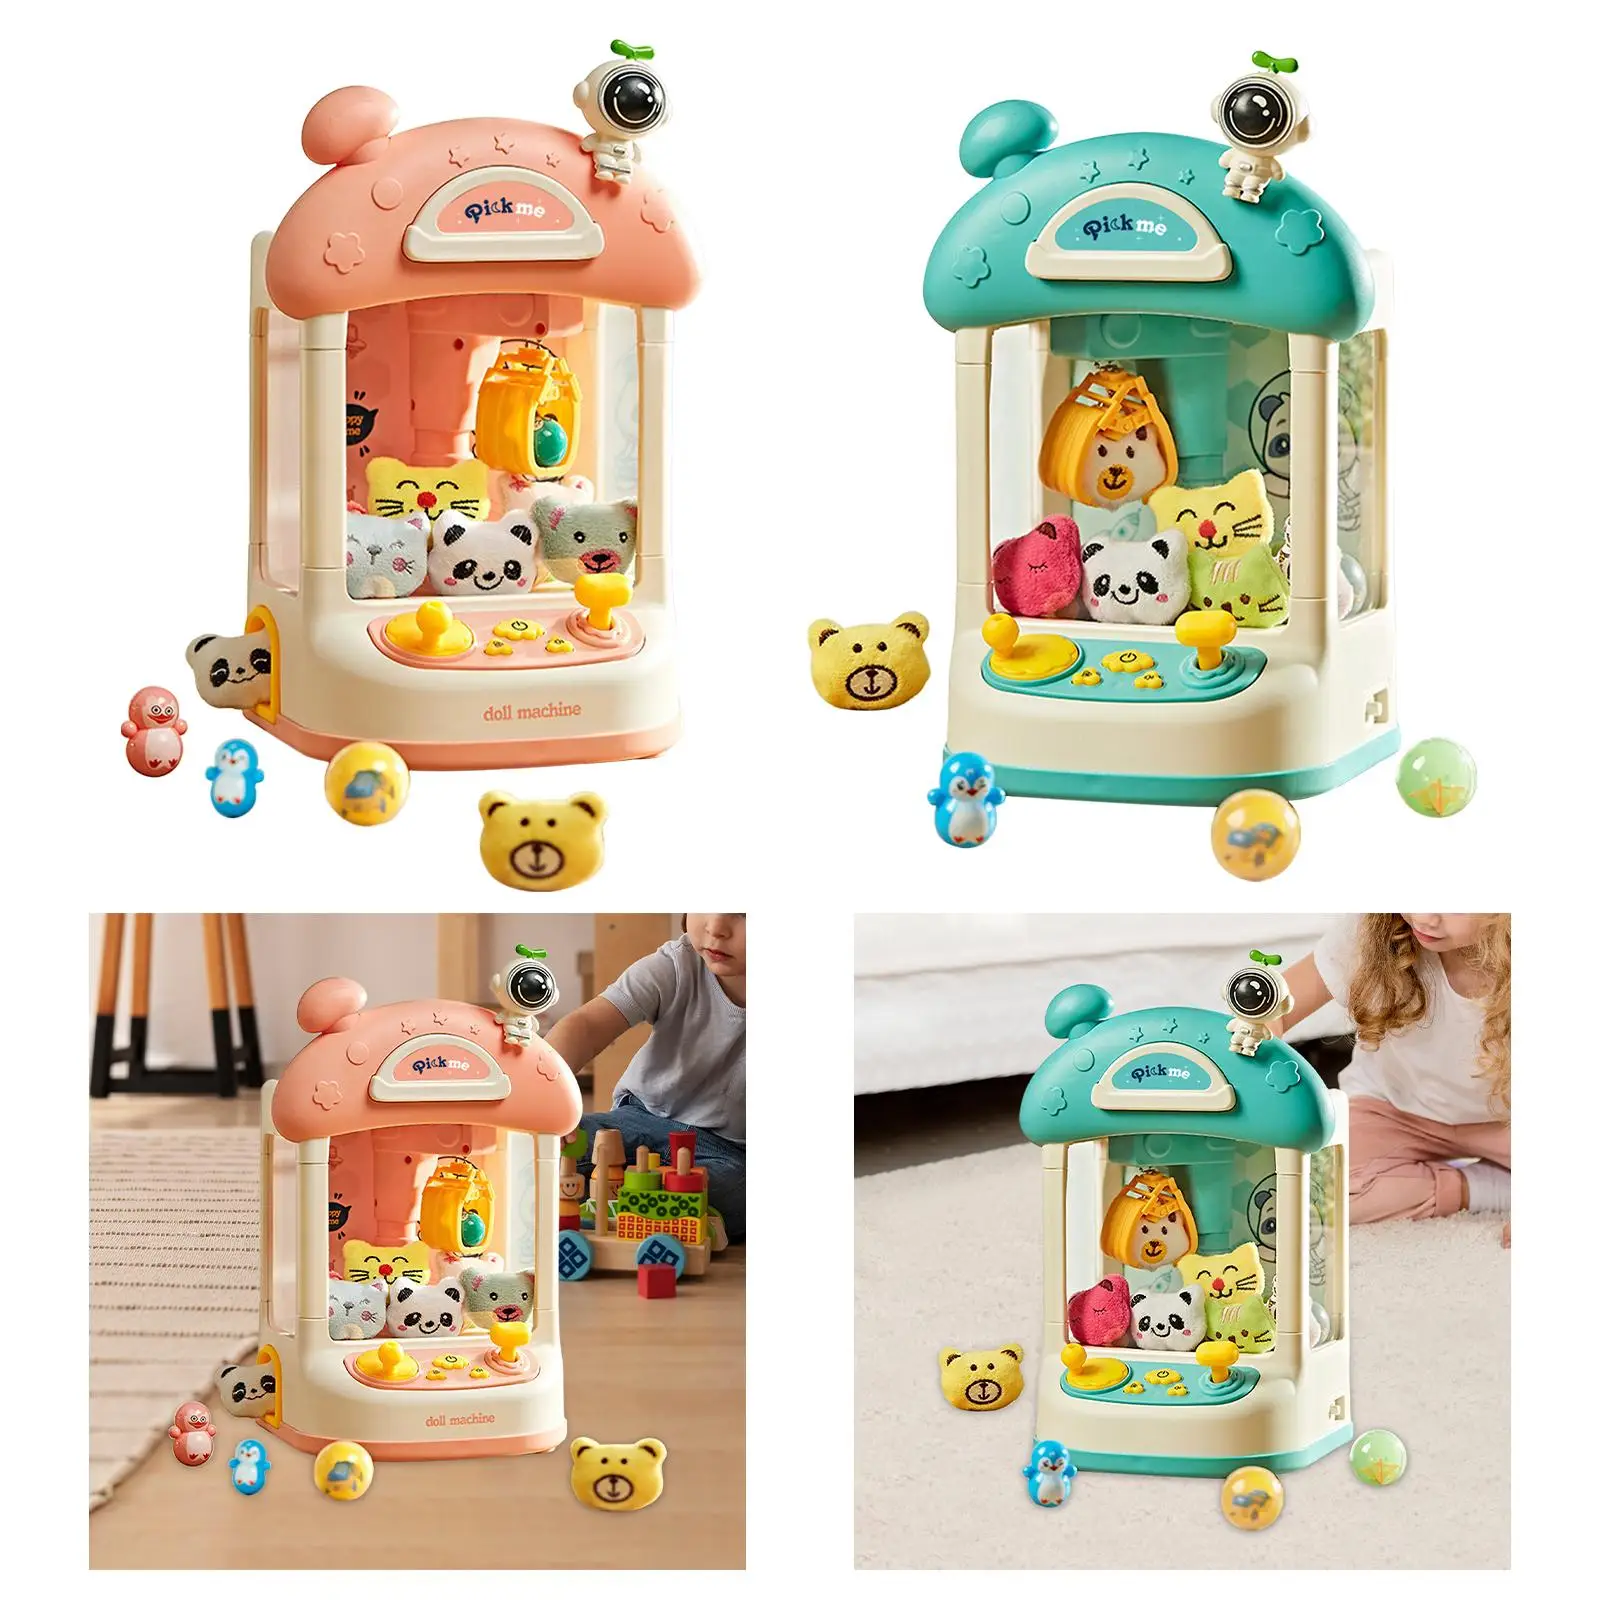 Small Claw Machine Game Prizes Toy Doll Grabbing Machine Mini Arcade Machine for Kids Girls Toddlers Adults Birthday Gifts